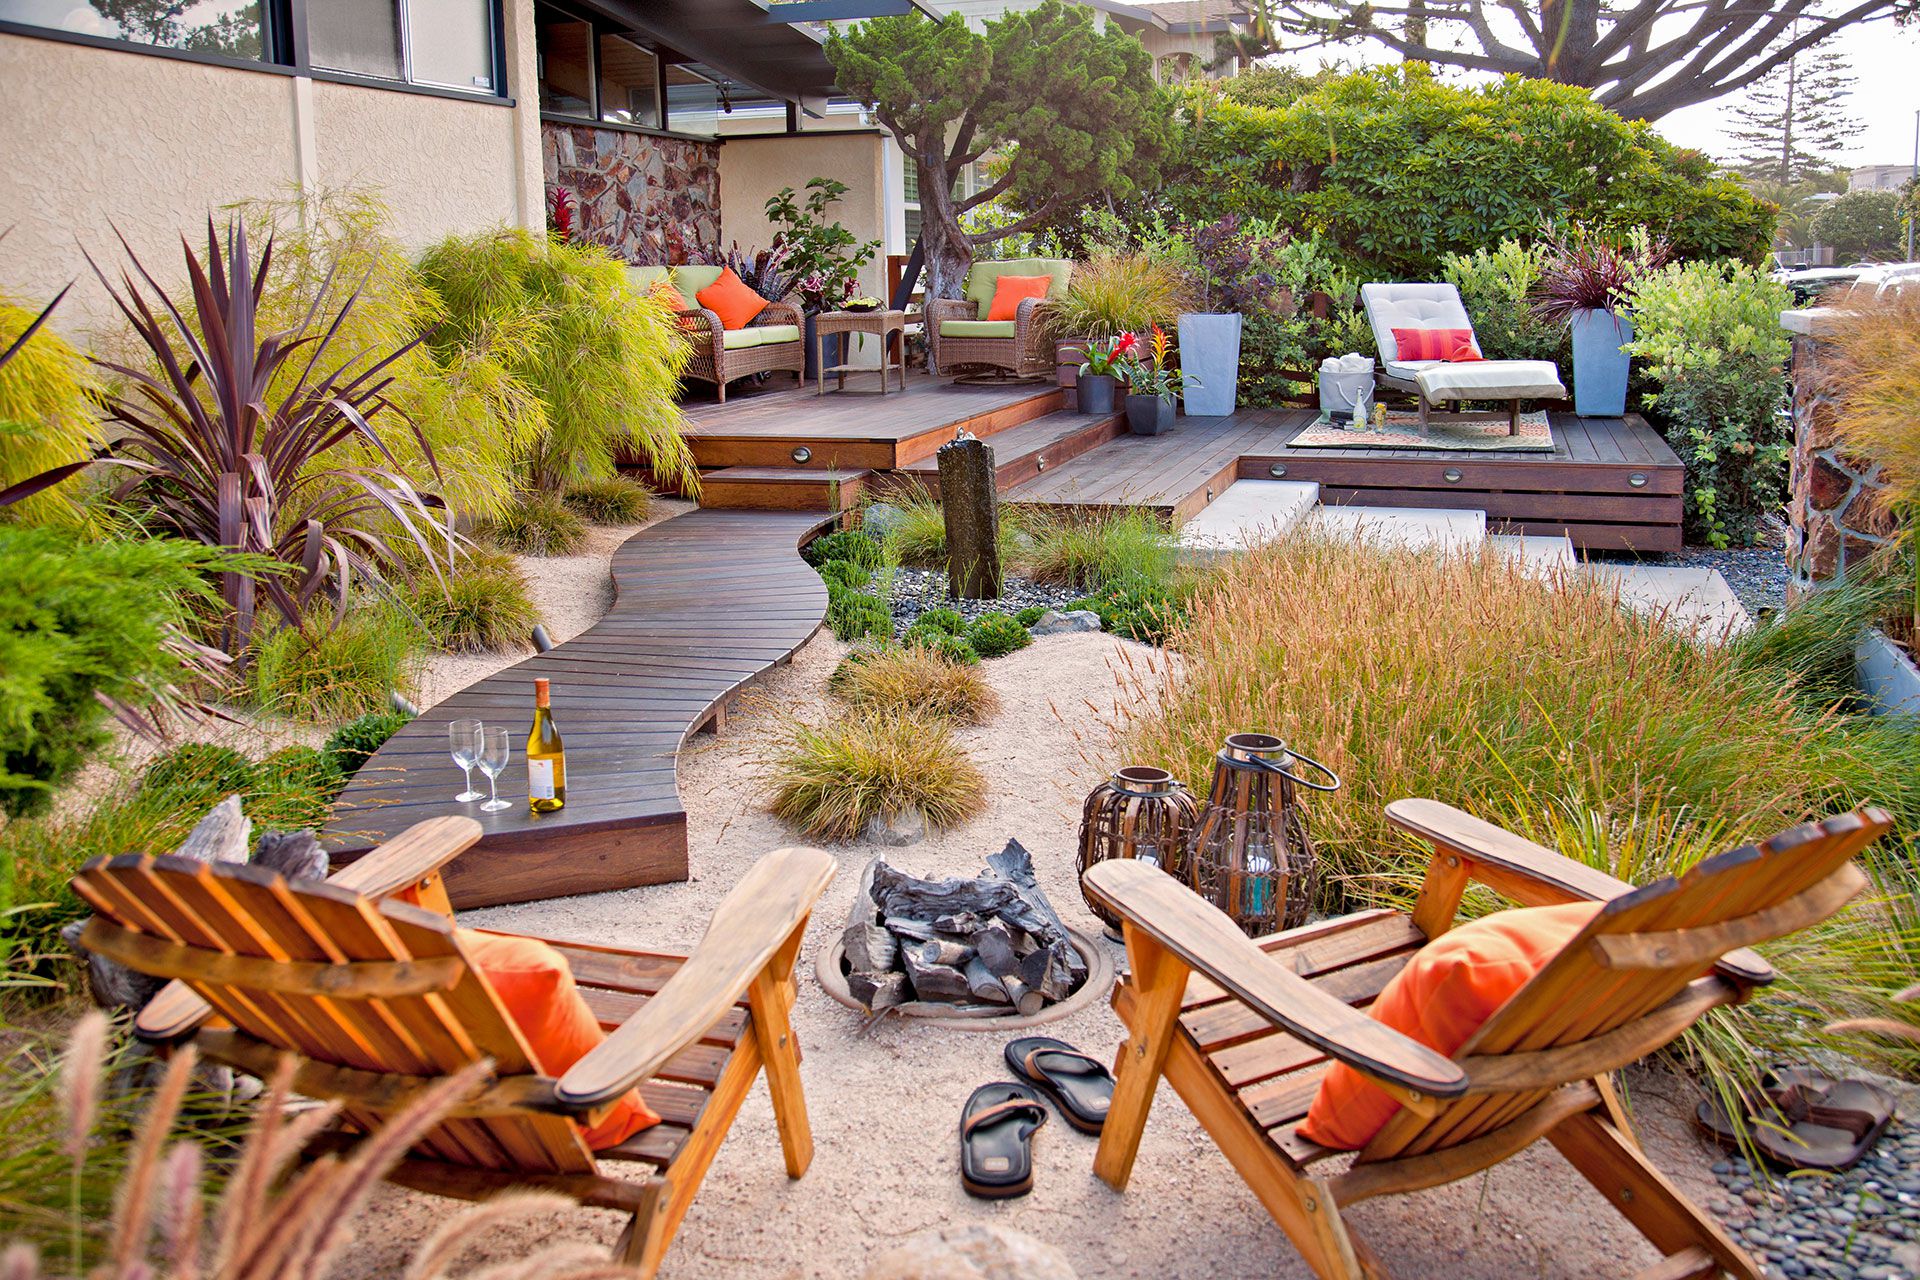 Elevating Outdoor Spaces: Professional Landscaping Services in Scottsdale and Surrounding Areas